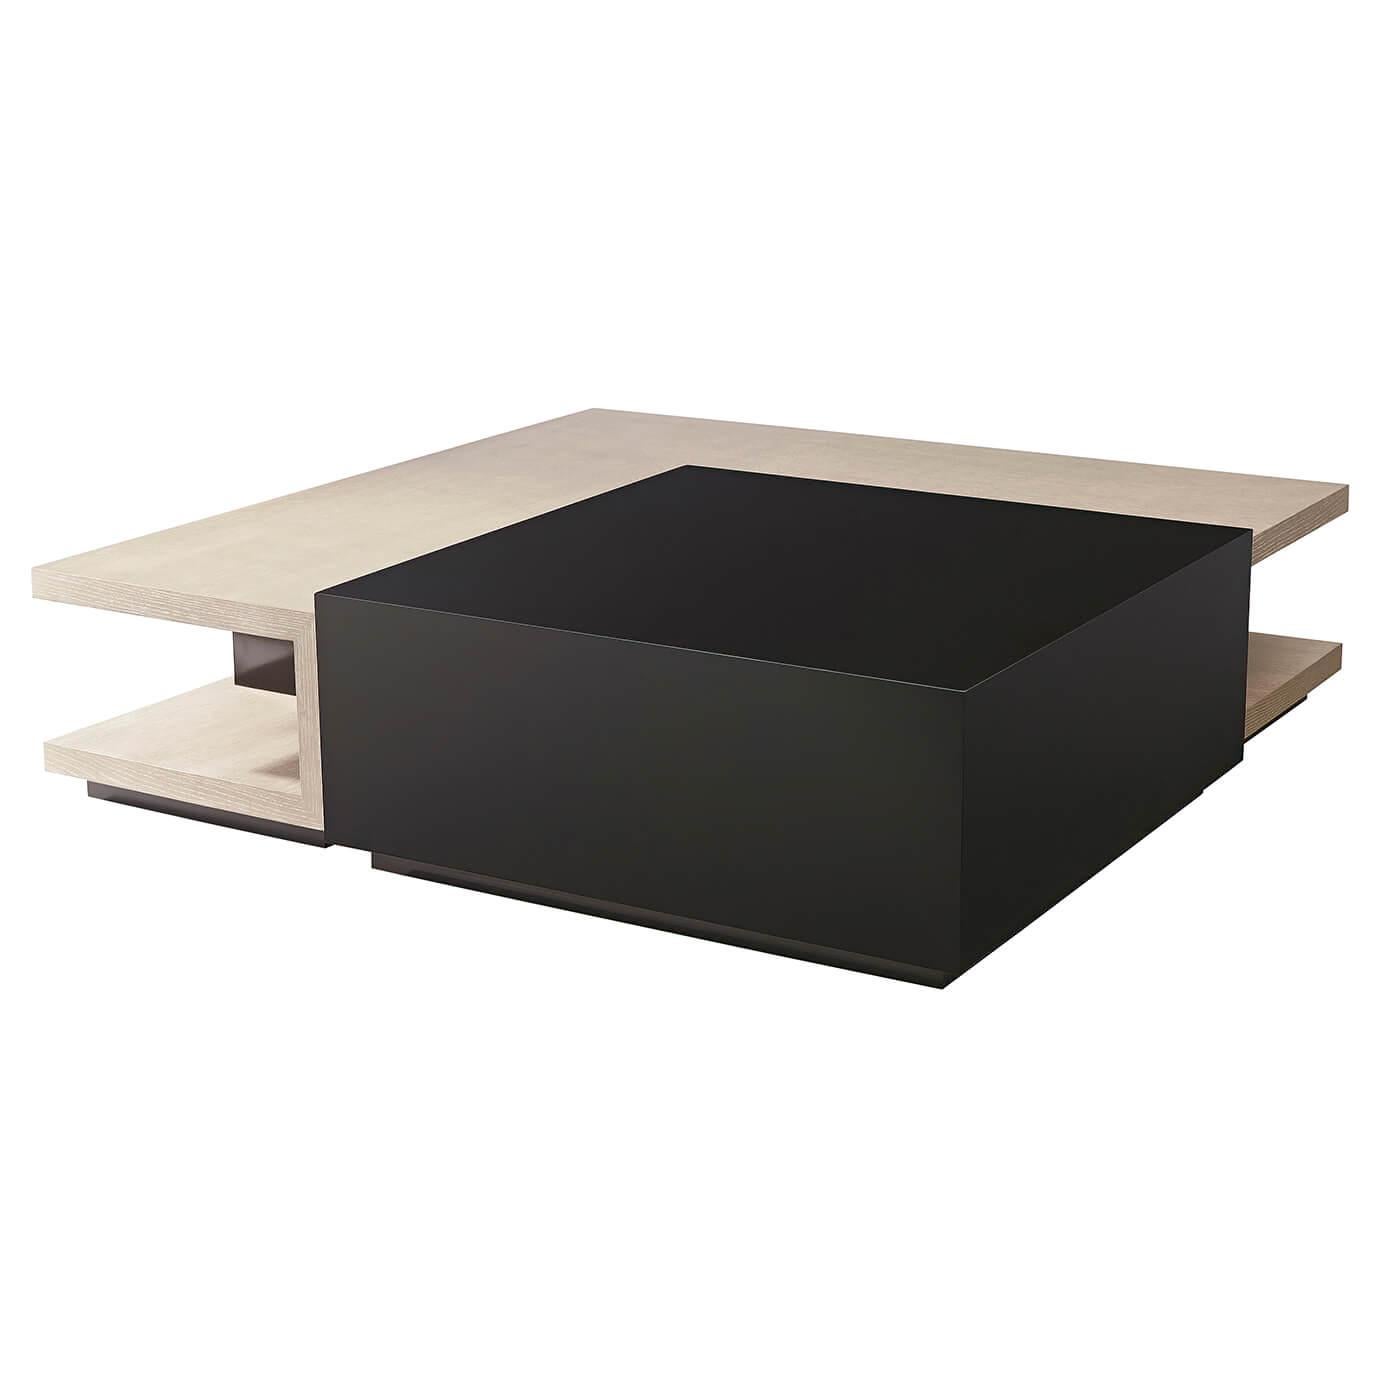 Modern cube cocktail table with Cava brown lacquered cube with concealed castors, quarter oak veneered 'L' table with foam finish and Cava lacquer uprights.
Dimensions: 68